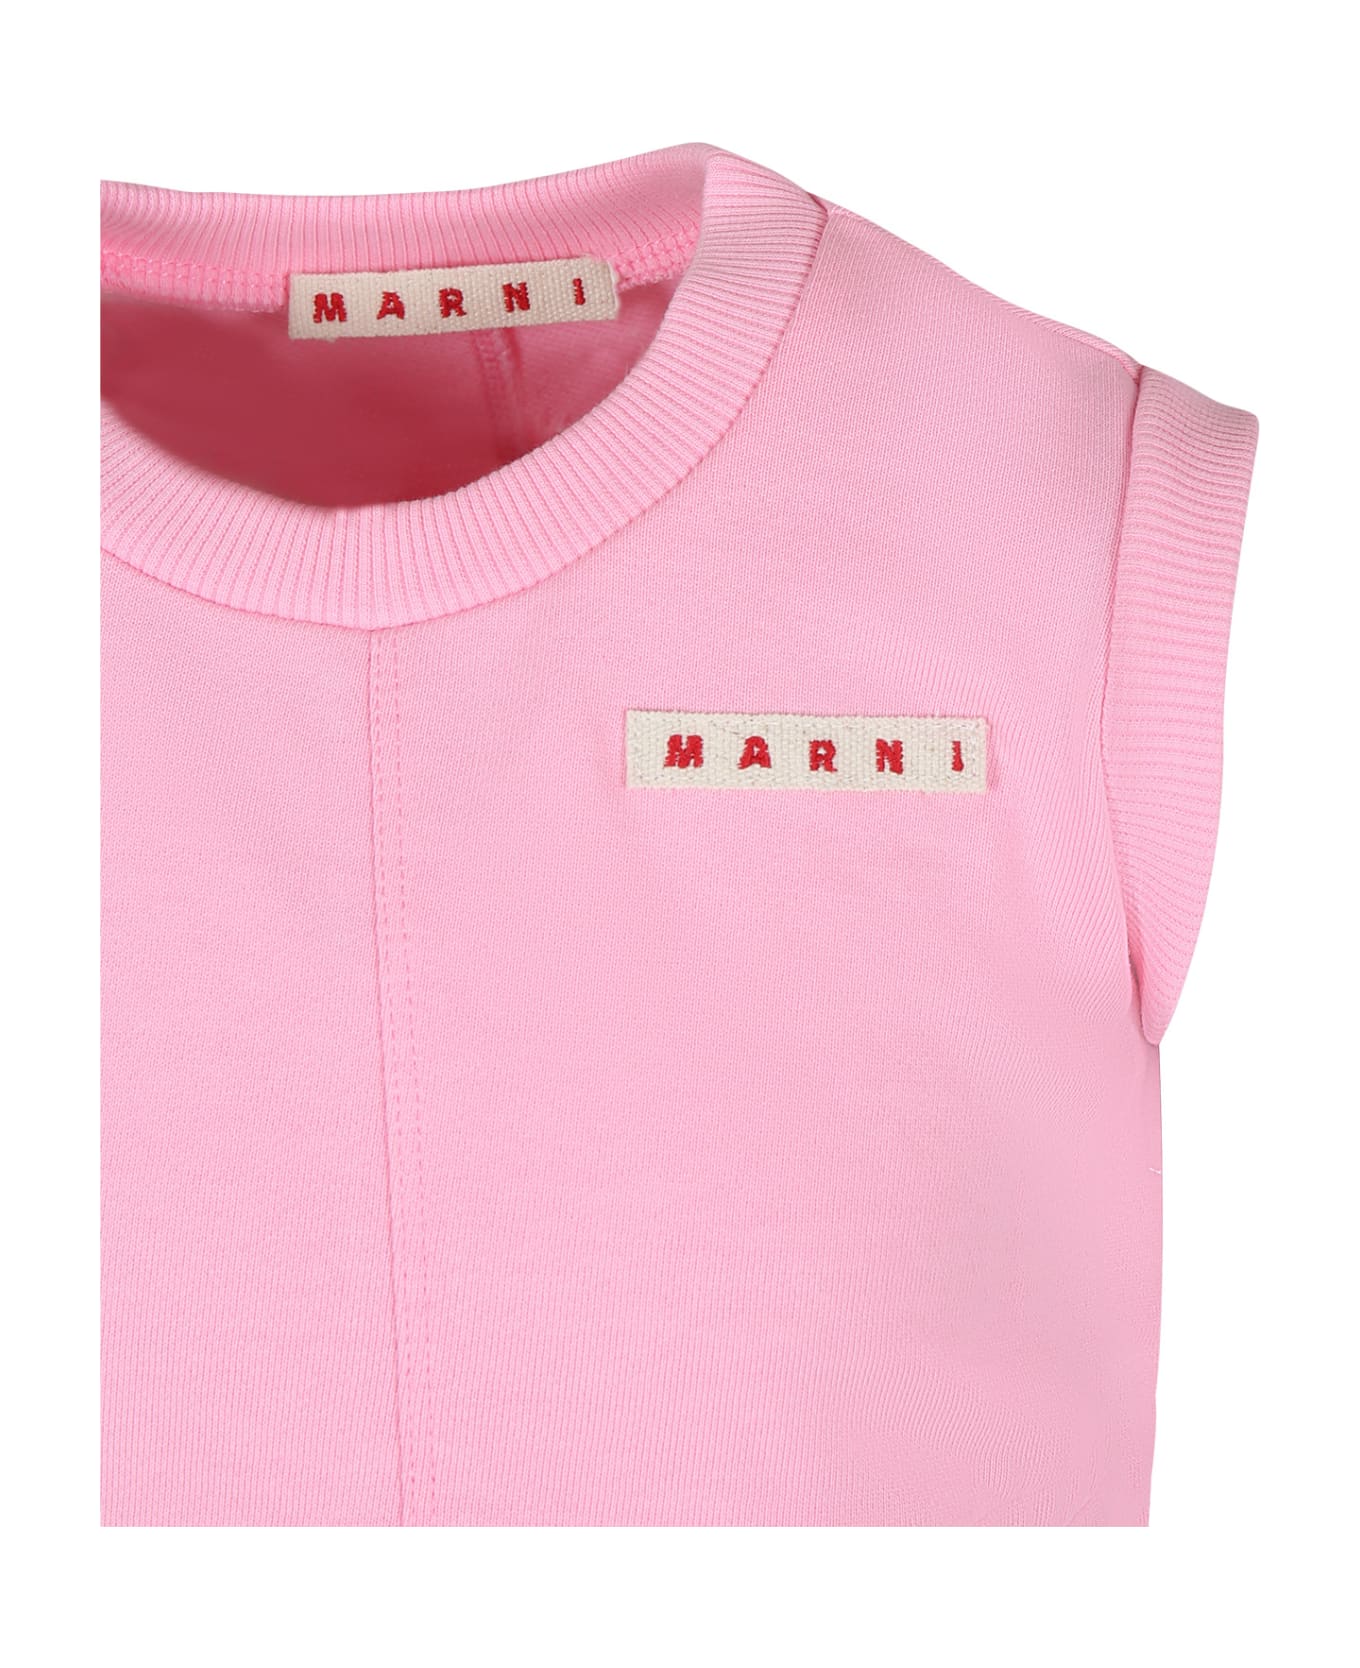 Marni Pink Top Gor Girl With Logo - Pink トップス